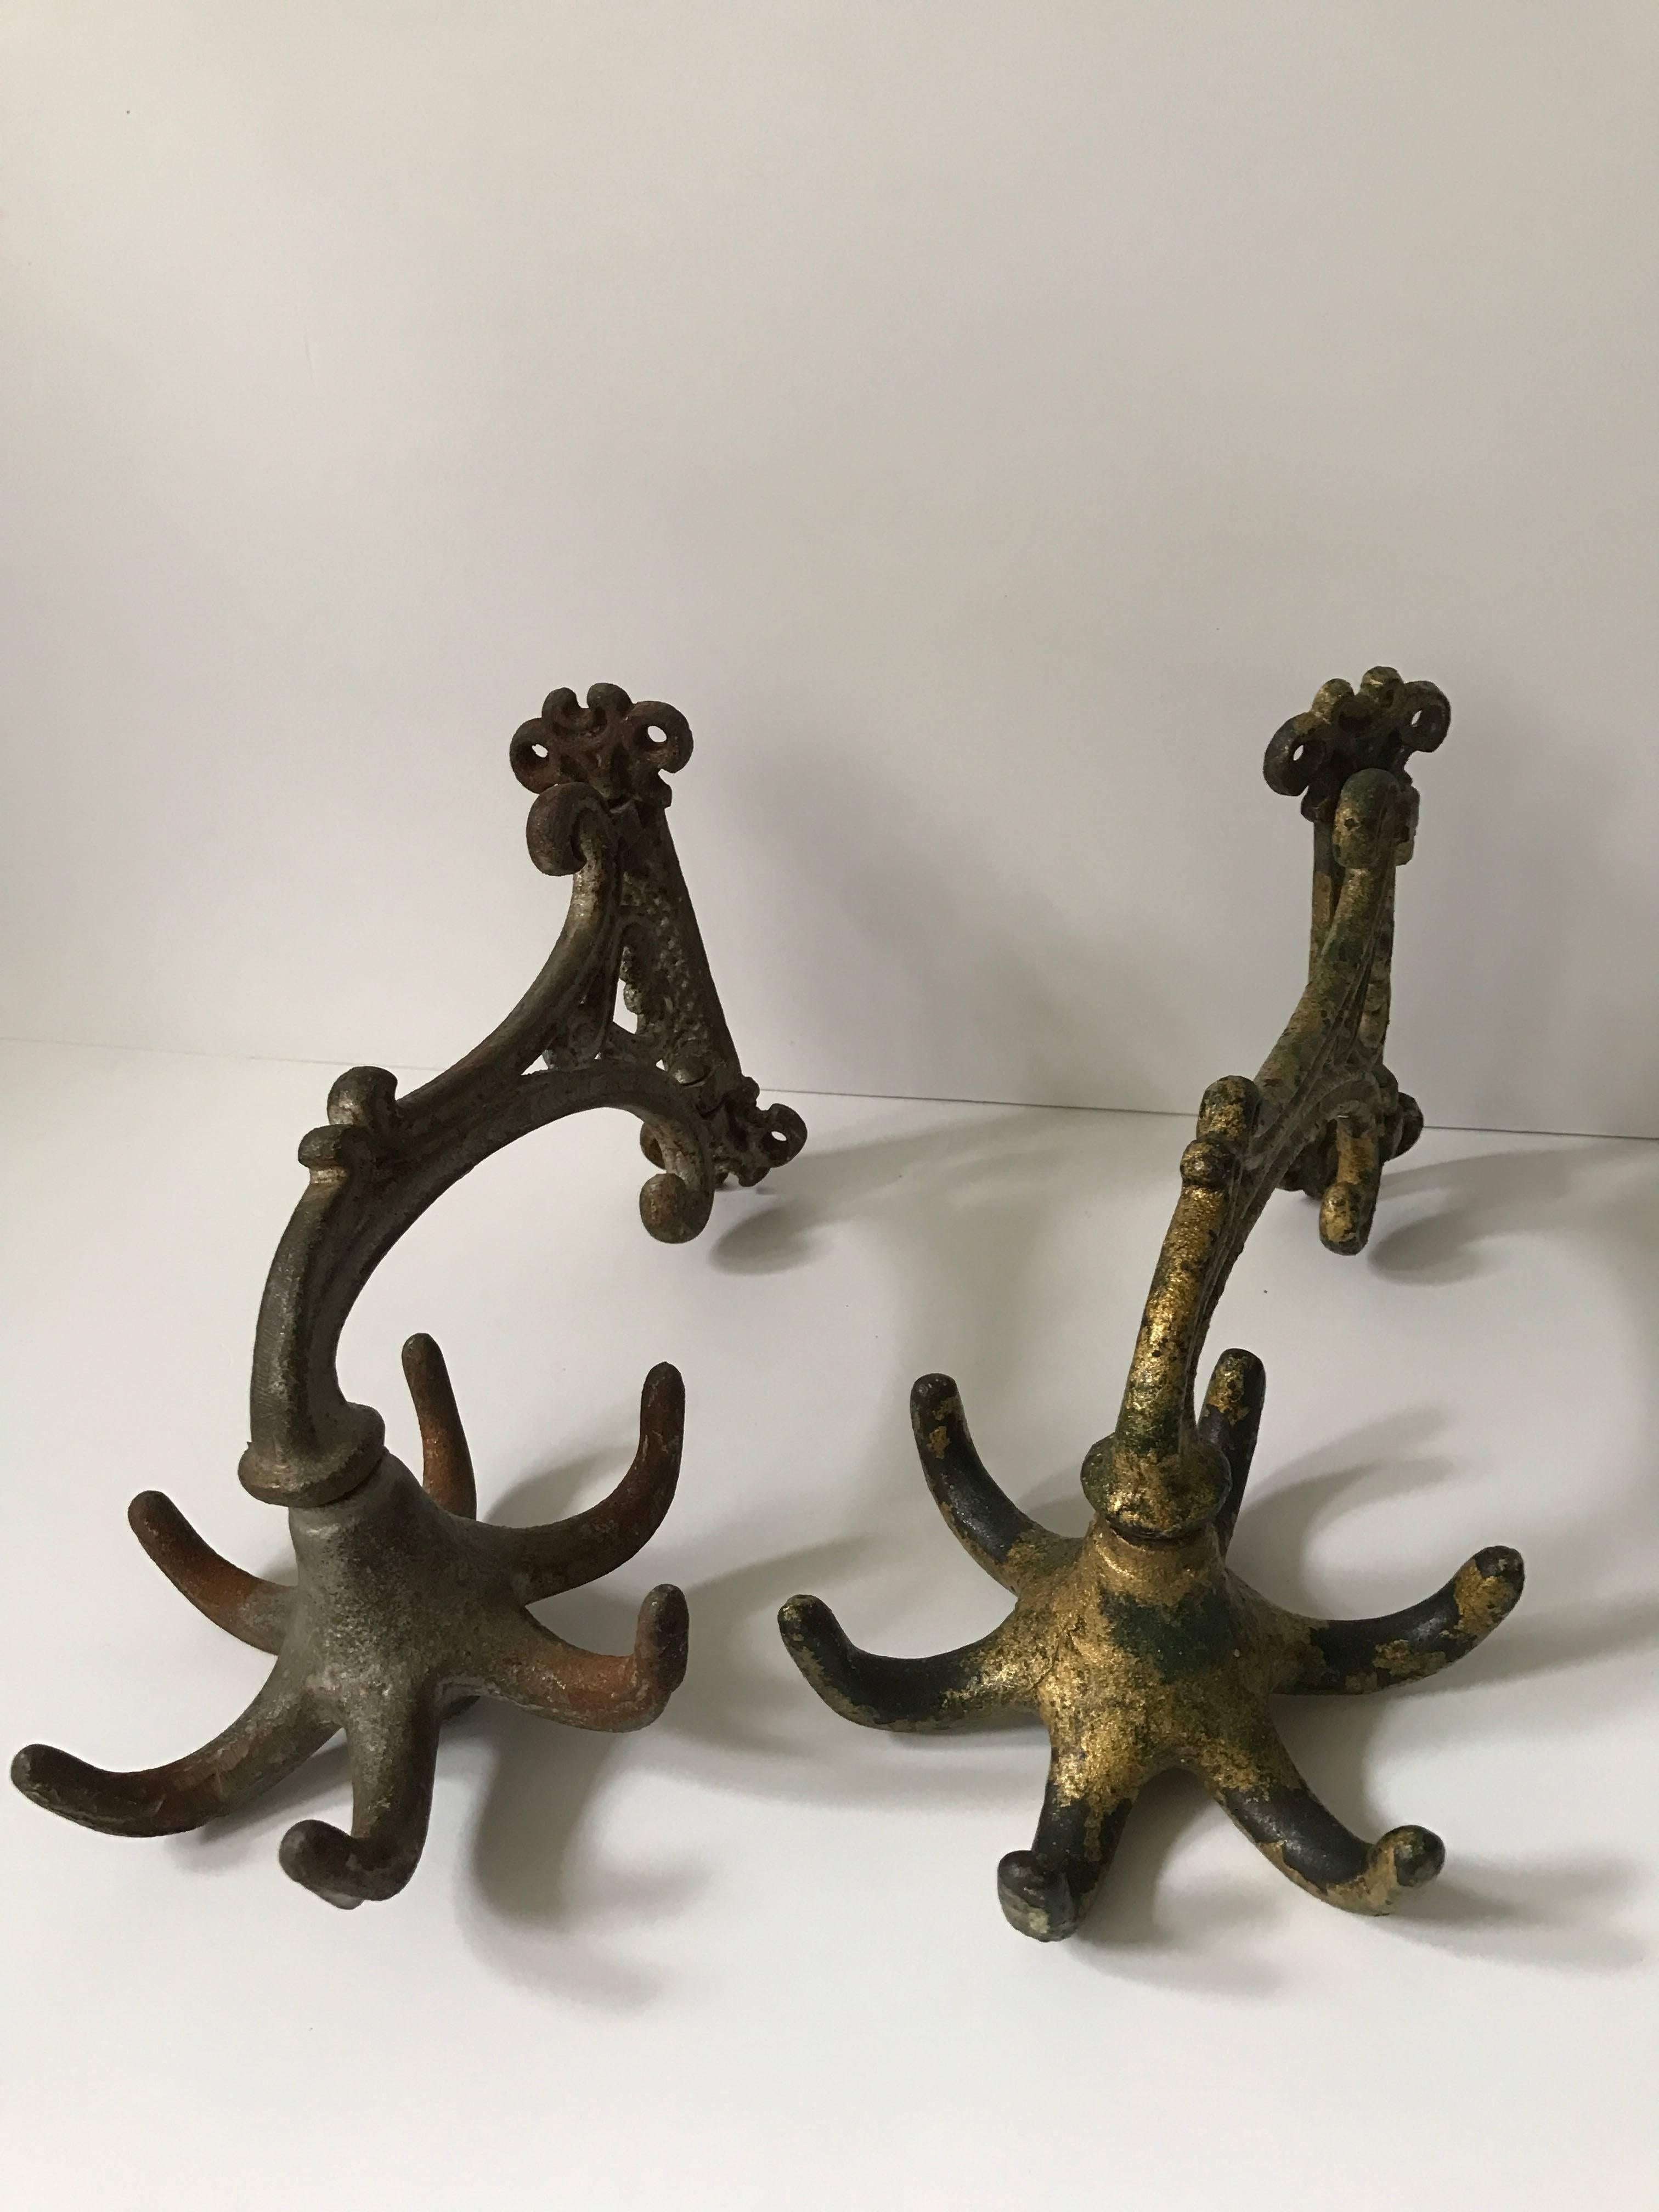 Beautiful pair of cast iron coathangers for wall mount made in the late part of the 19th century made most likely in Sweden and they are not exactly identical, the difference is the knob underneath the hangers, see pictures. They are otherwise